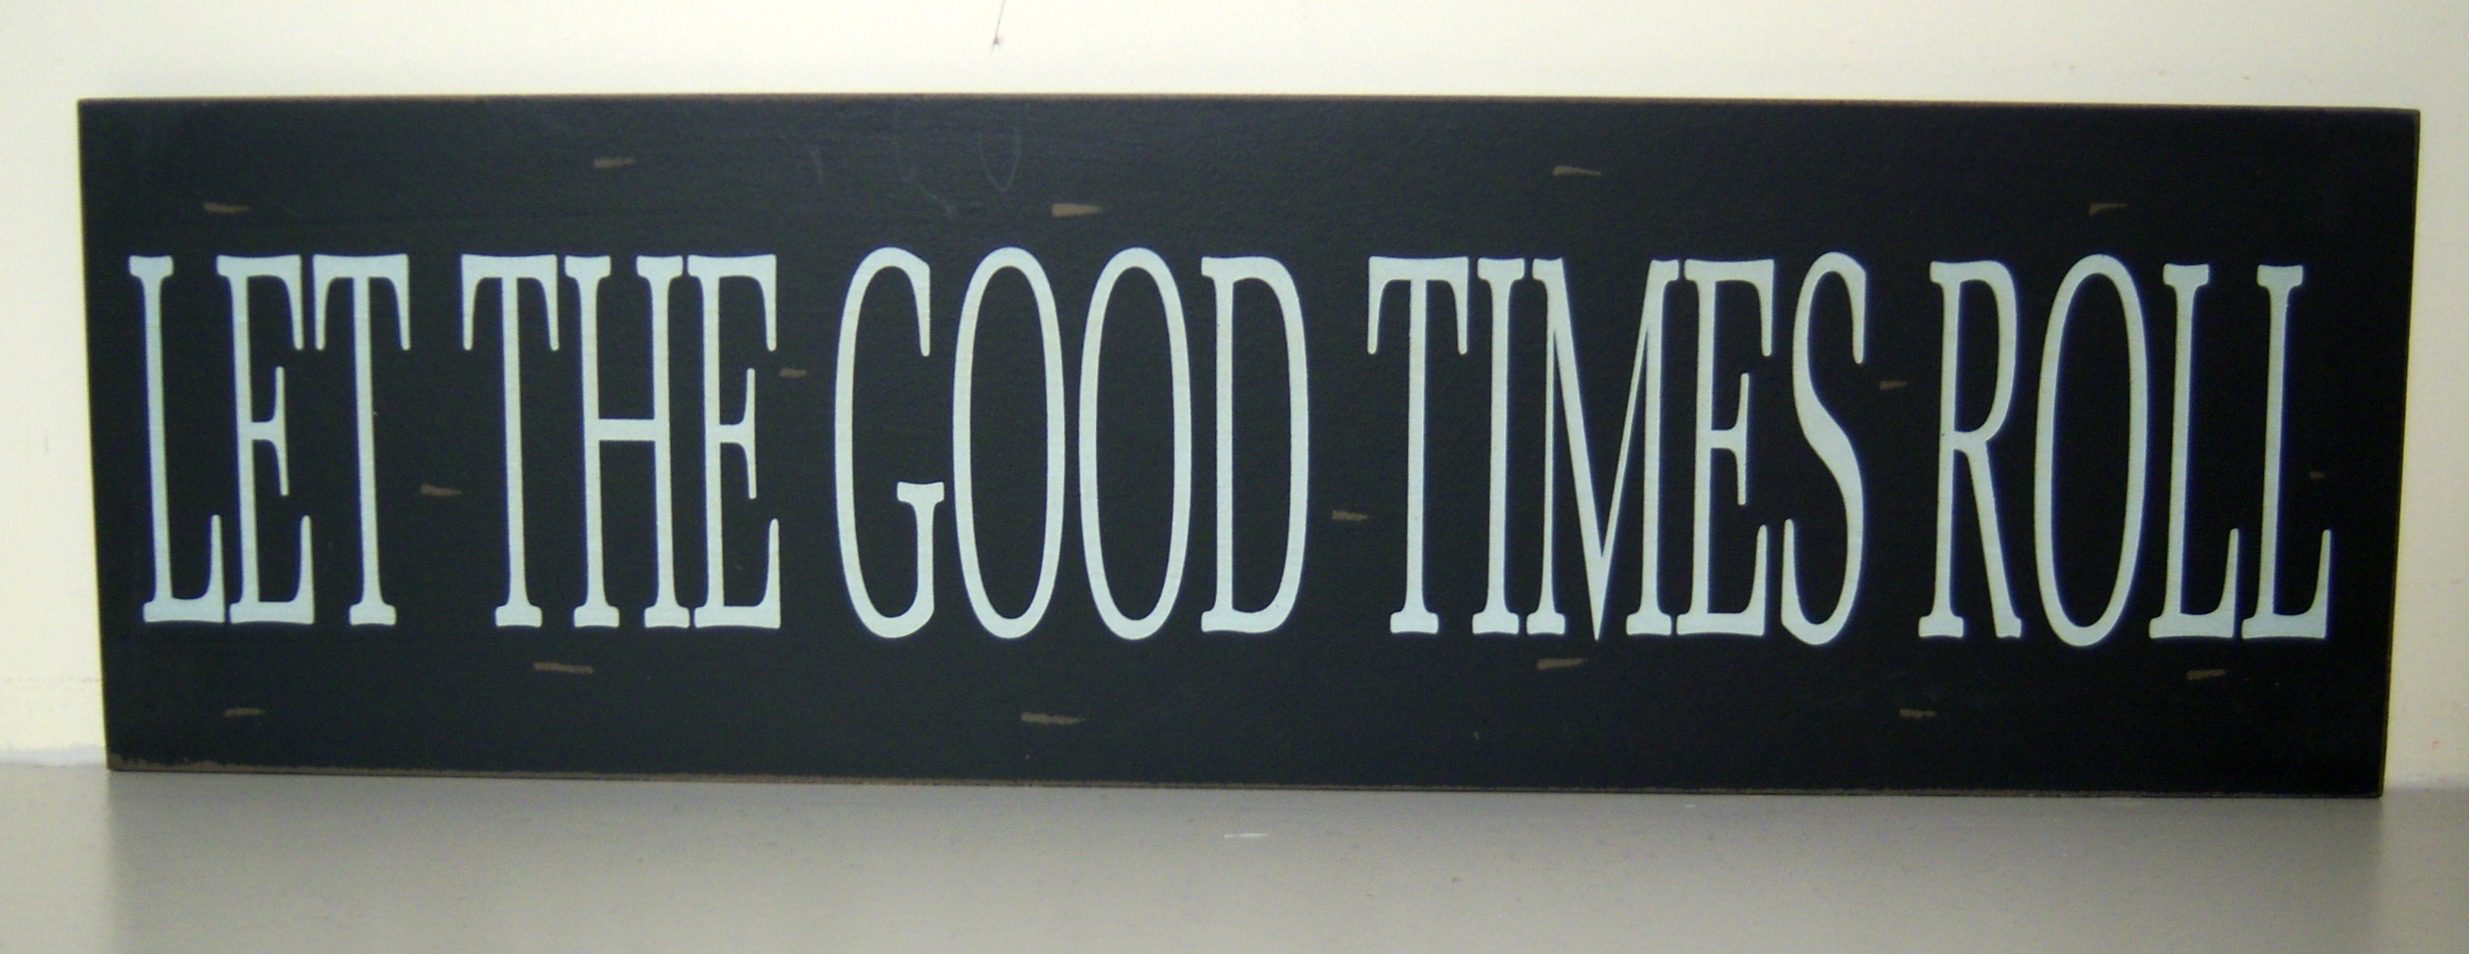 Black and White Wooden Wall Plaque/ Sign LET THE GOOD TIMES ROLL 48x14x1 cms